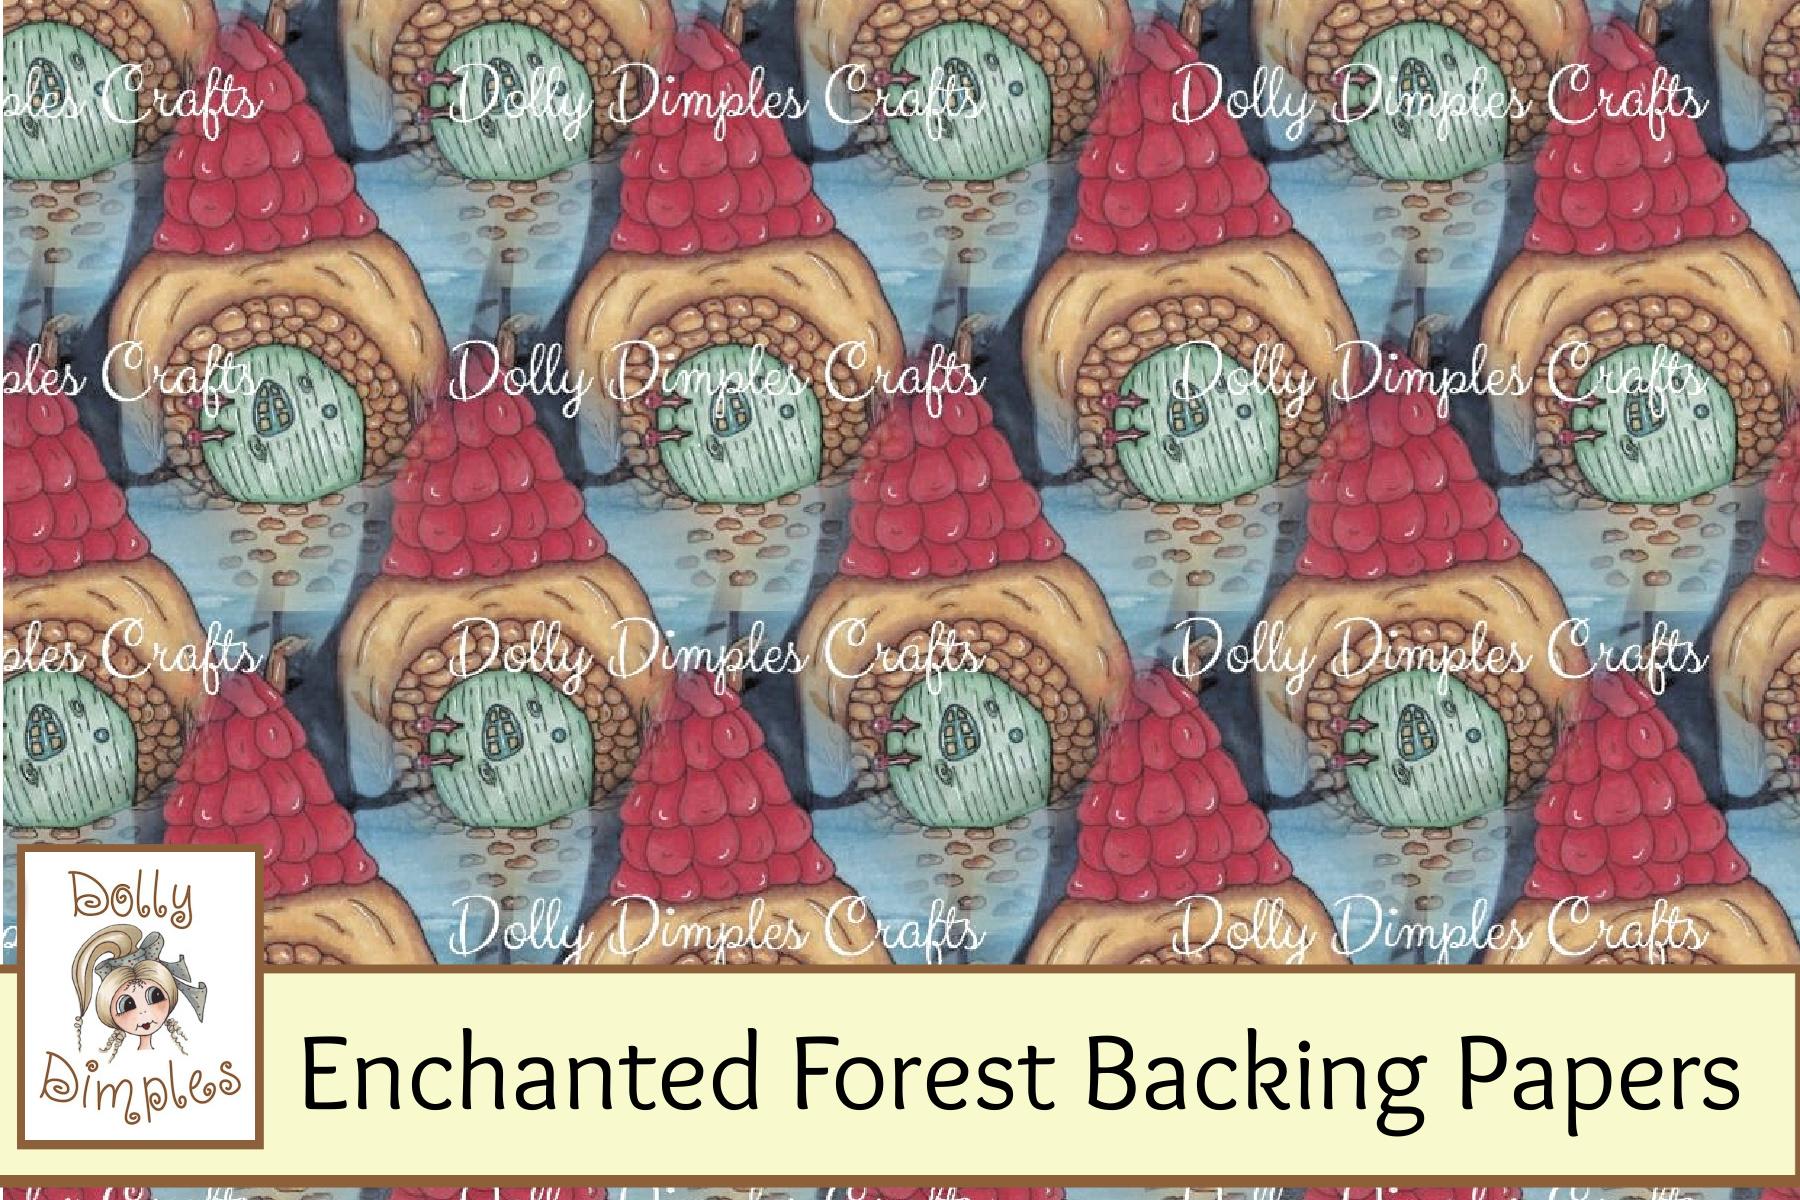 Enchanted Forest Backing Papers